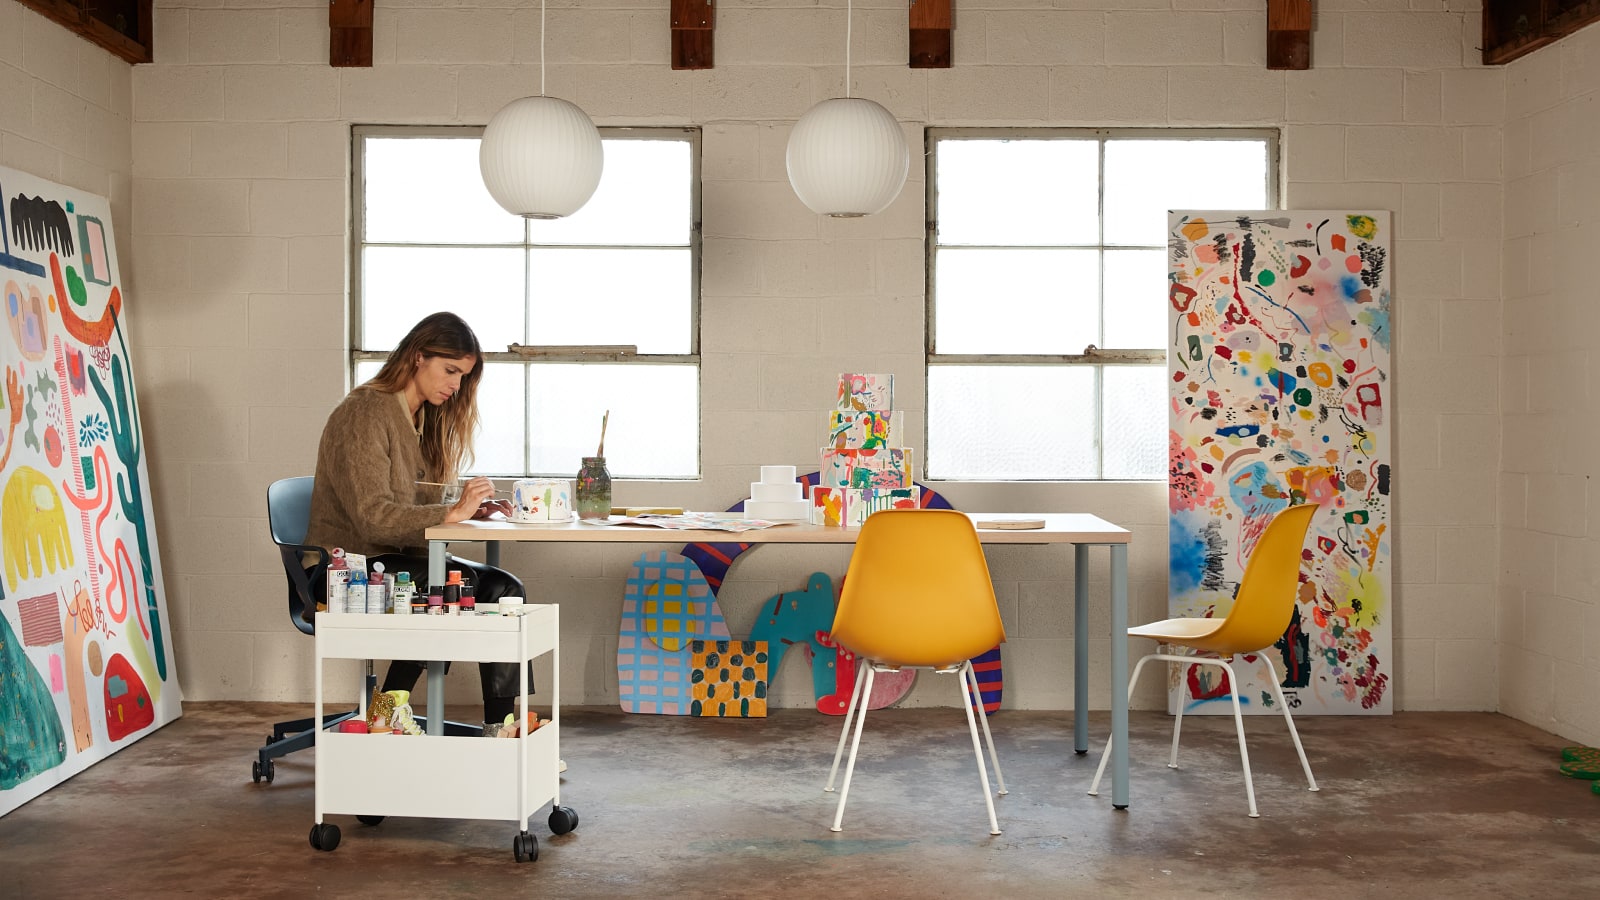 Artist Kindah Khalidy sitting in a Zeph Chair at a table, with two yellow Eames shell chairs.